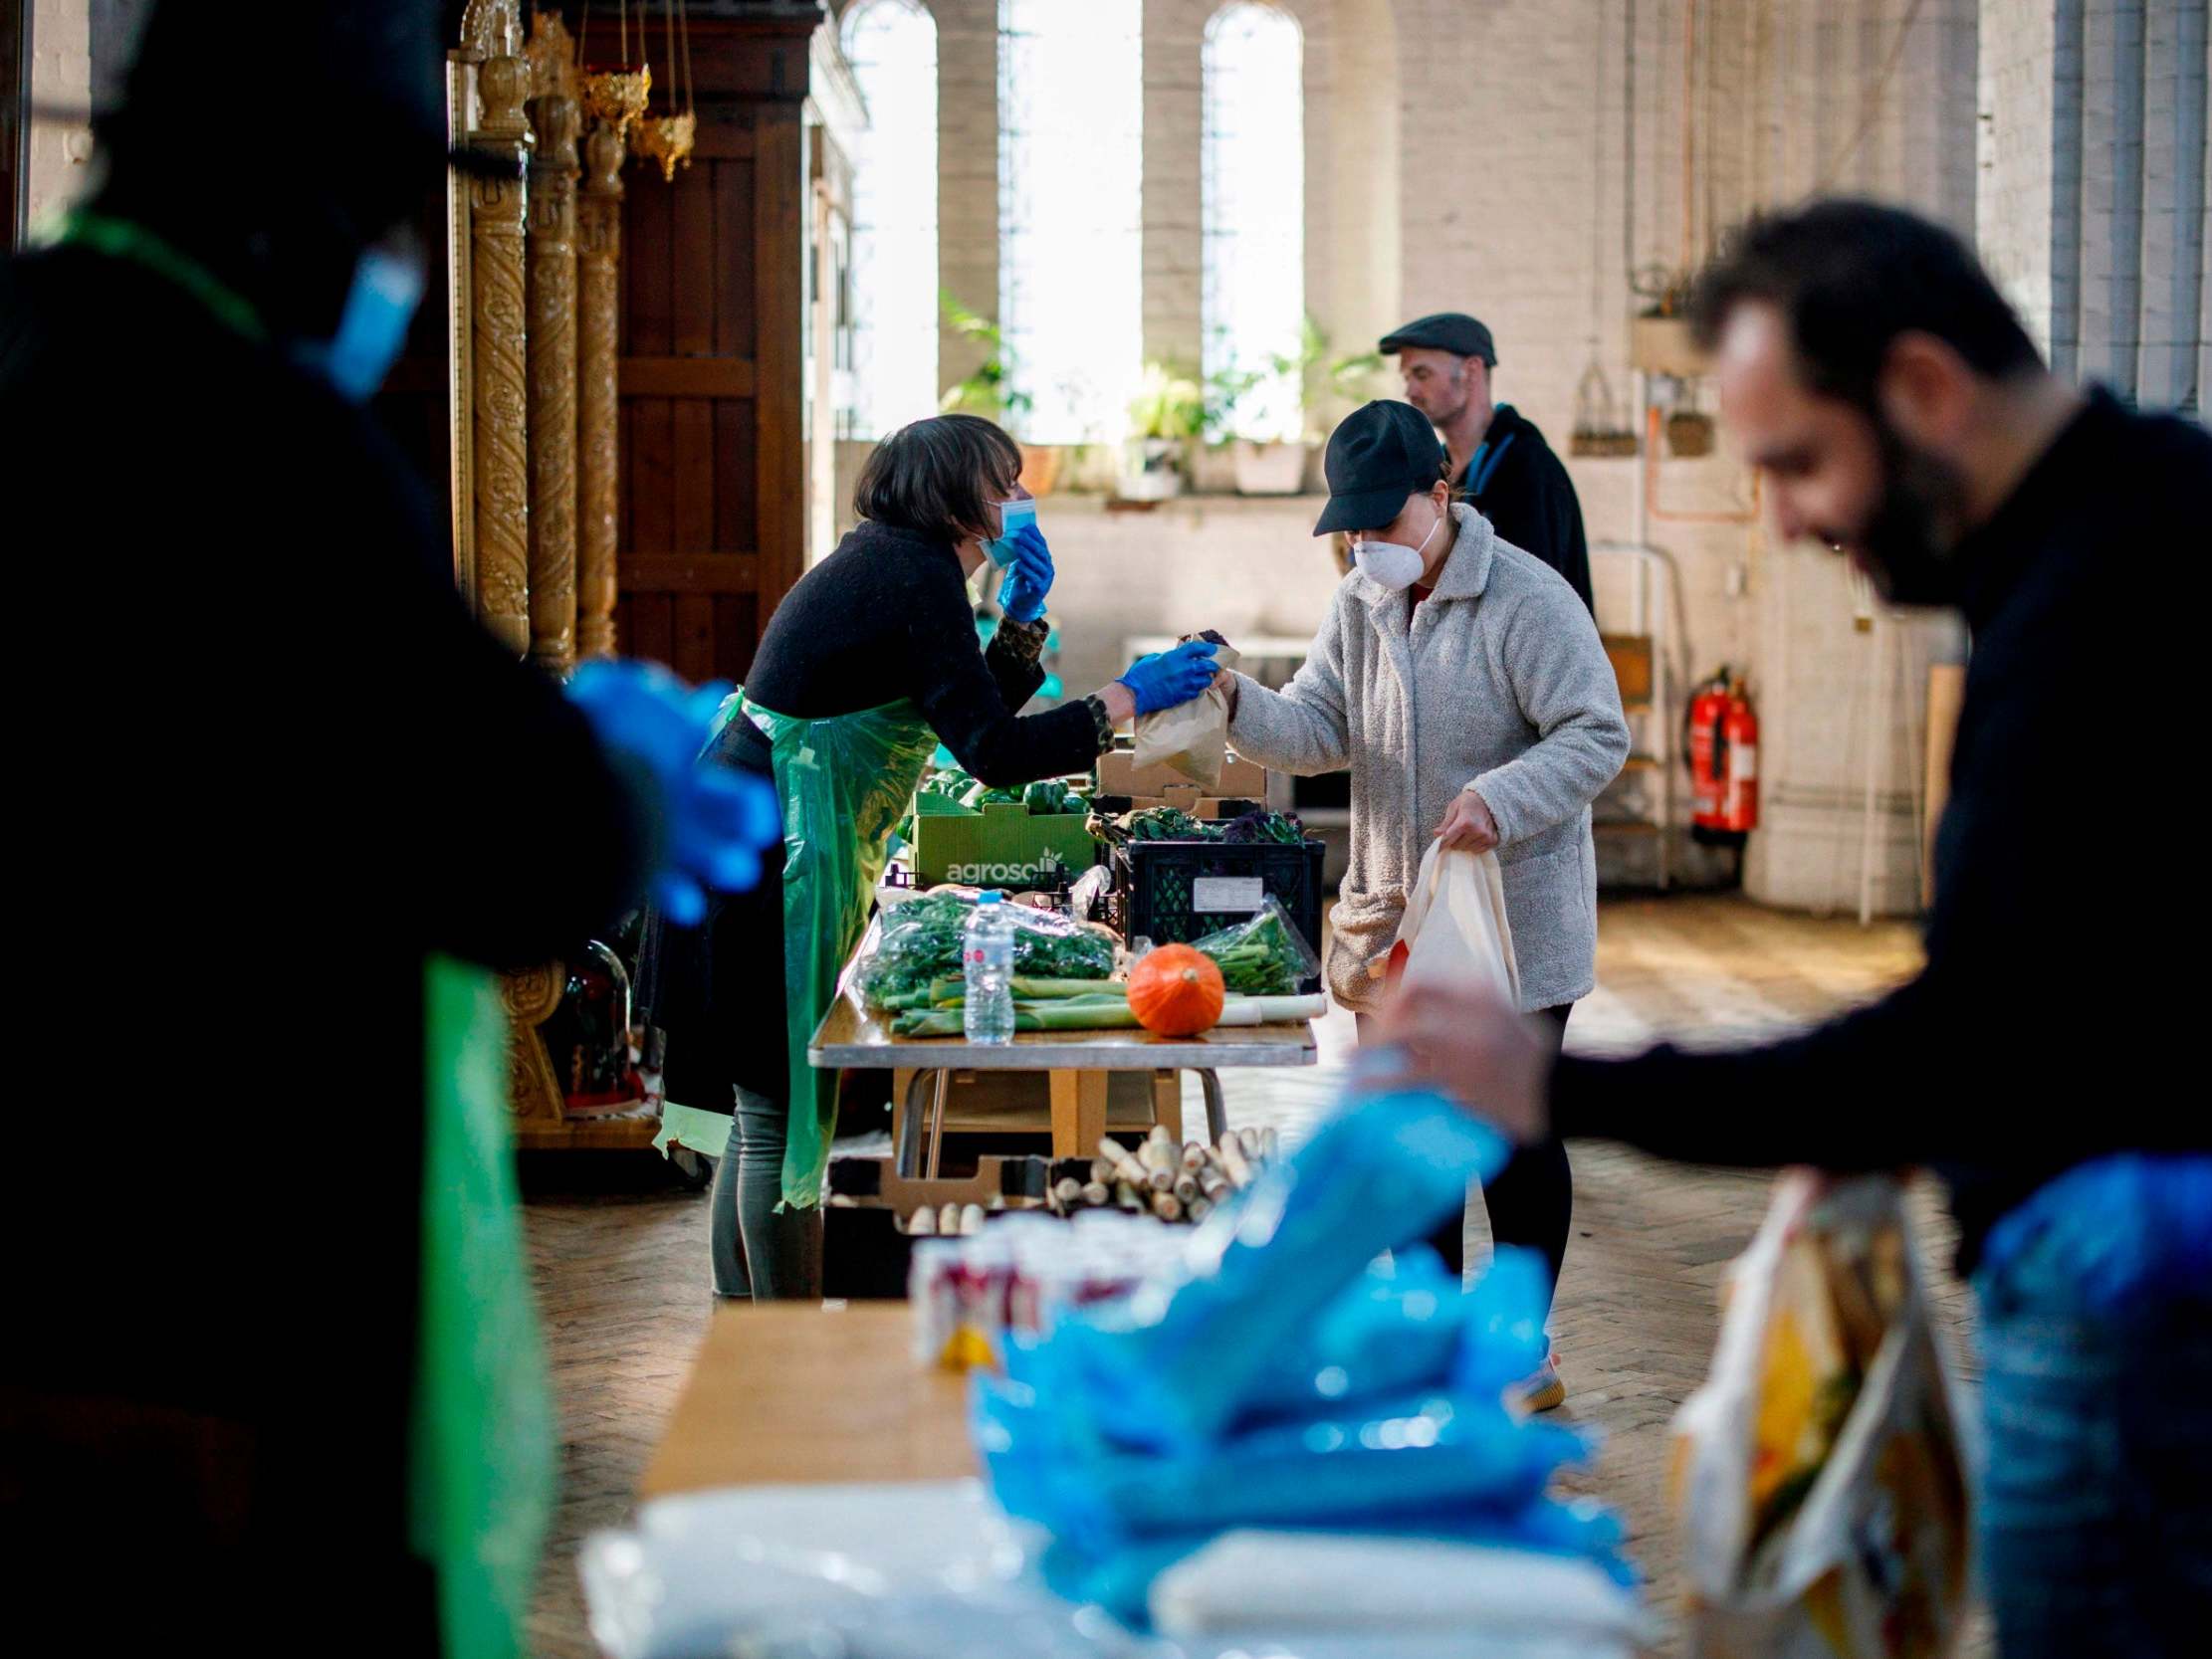 Volunteers hand out supplies at a centre in Leytonstone